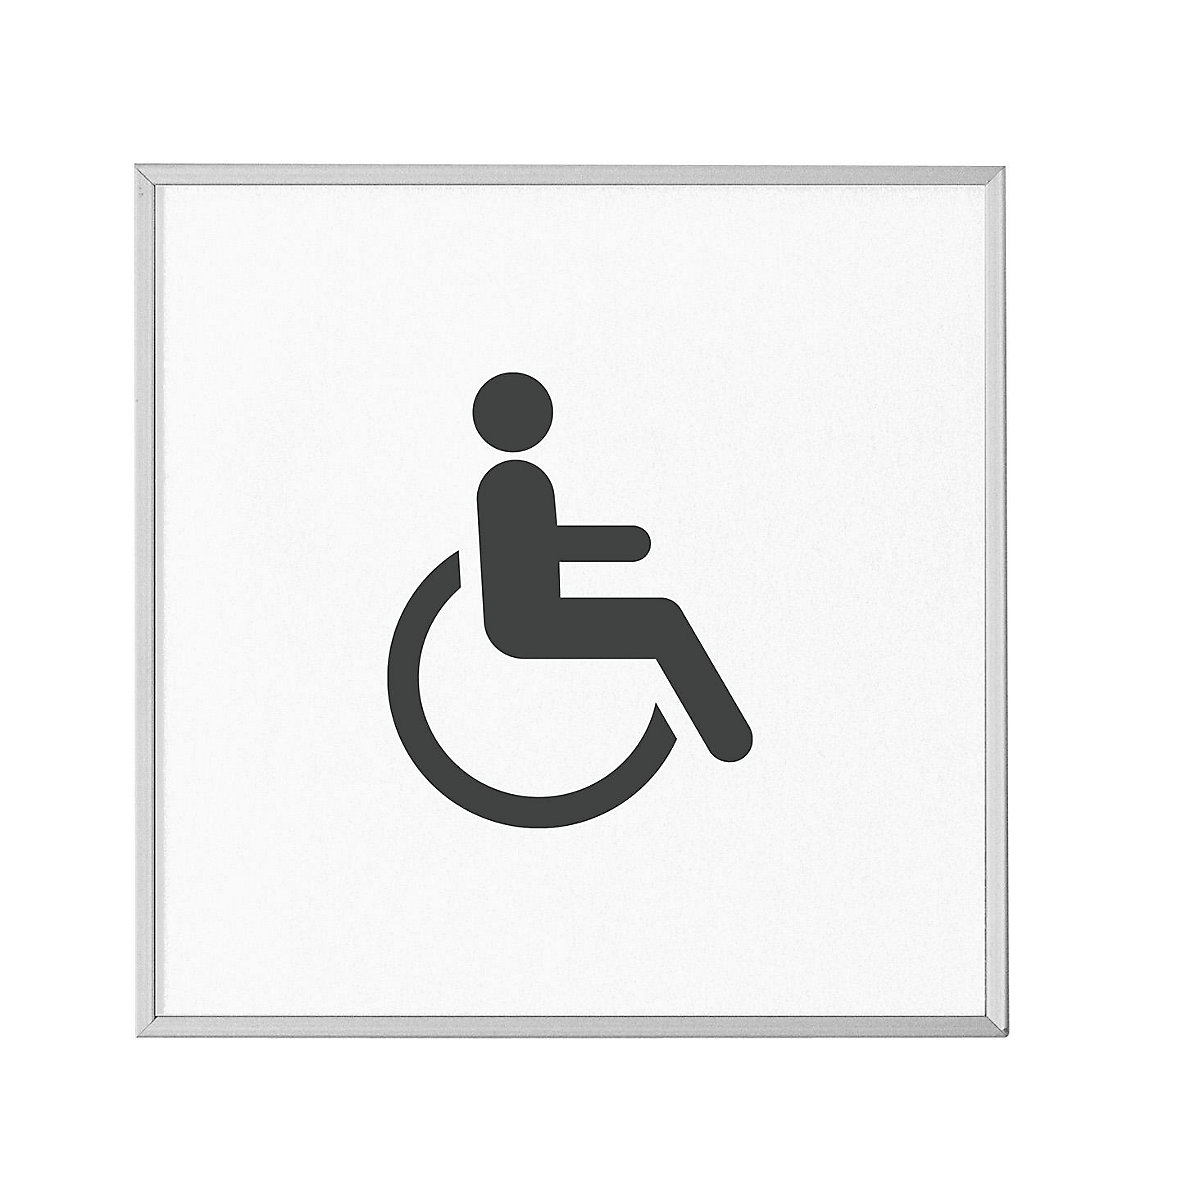 MADRID Silver Line™ door sign, pictogram HxW 120 x 120 mm, barrier free WC-16